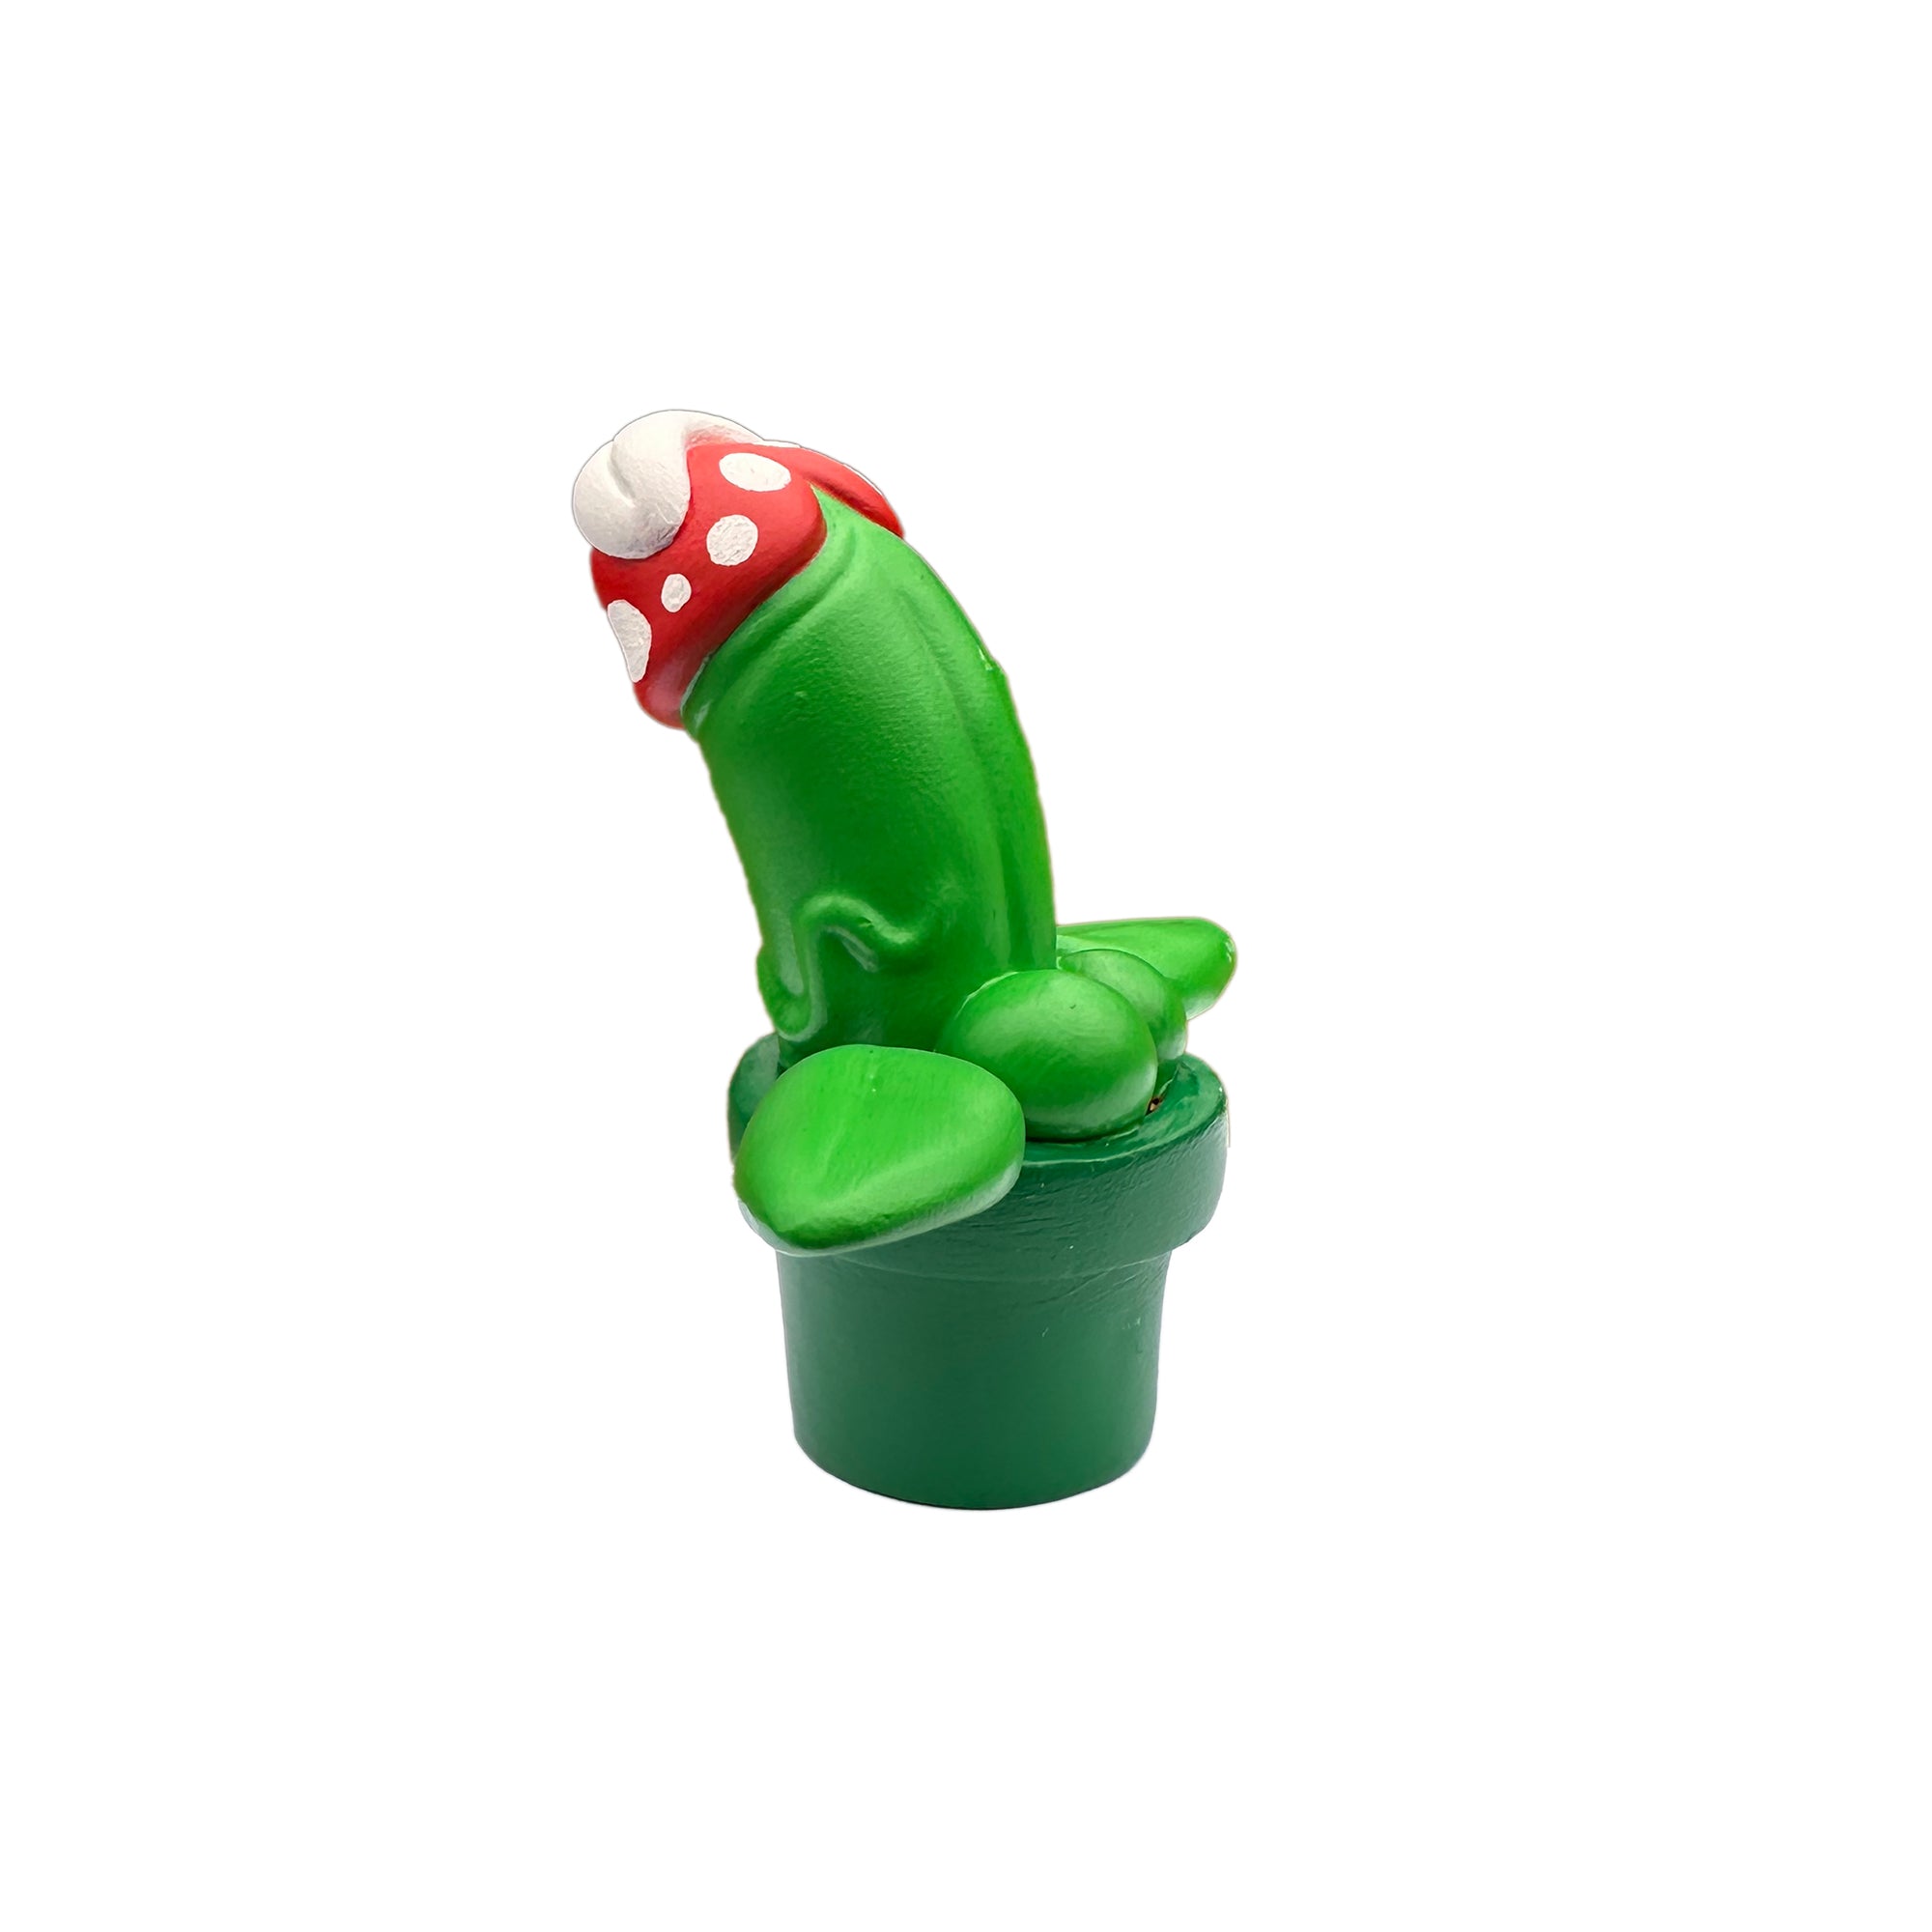 A close-up of a green toy plant with a red hat, part of Simon Says Macy & Friends - Piranha Pecker by Prime.